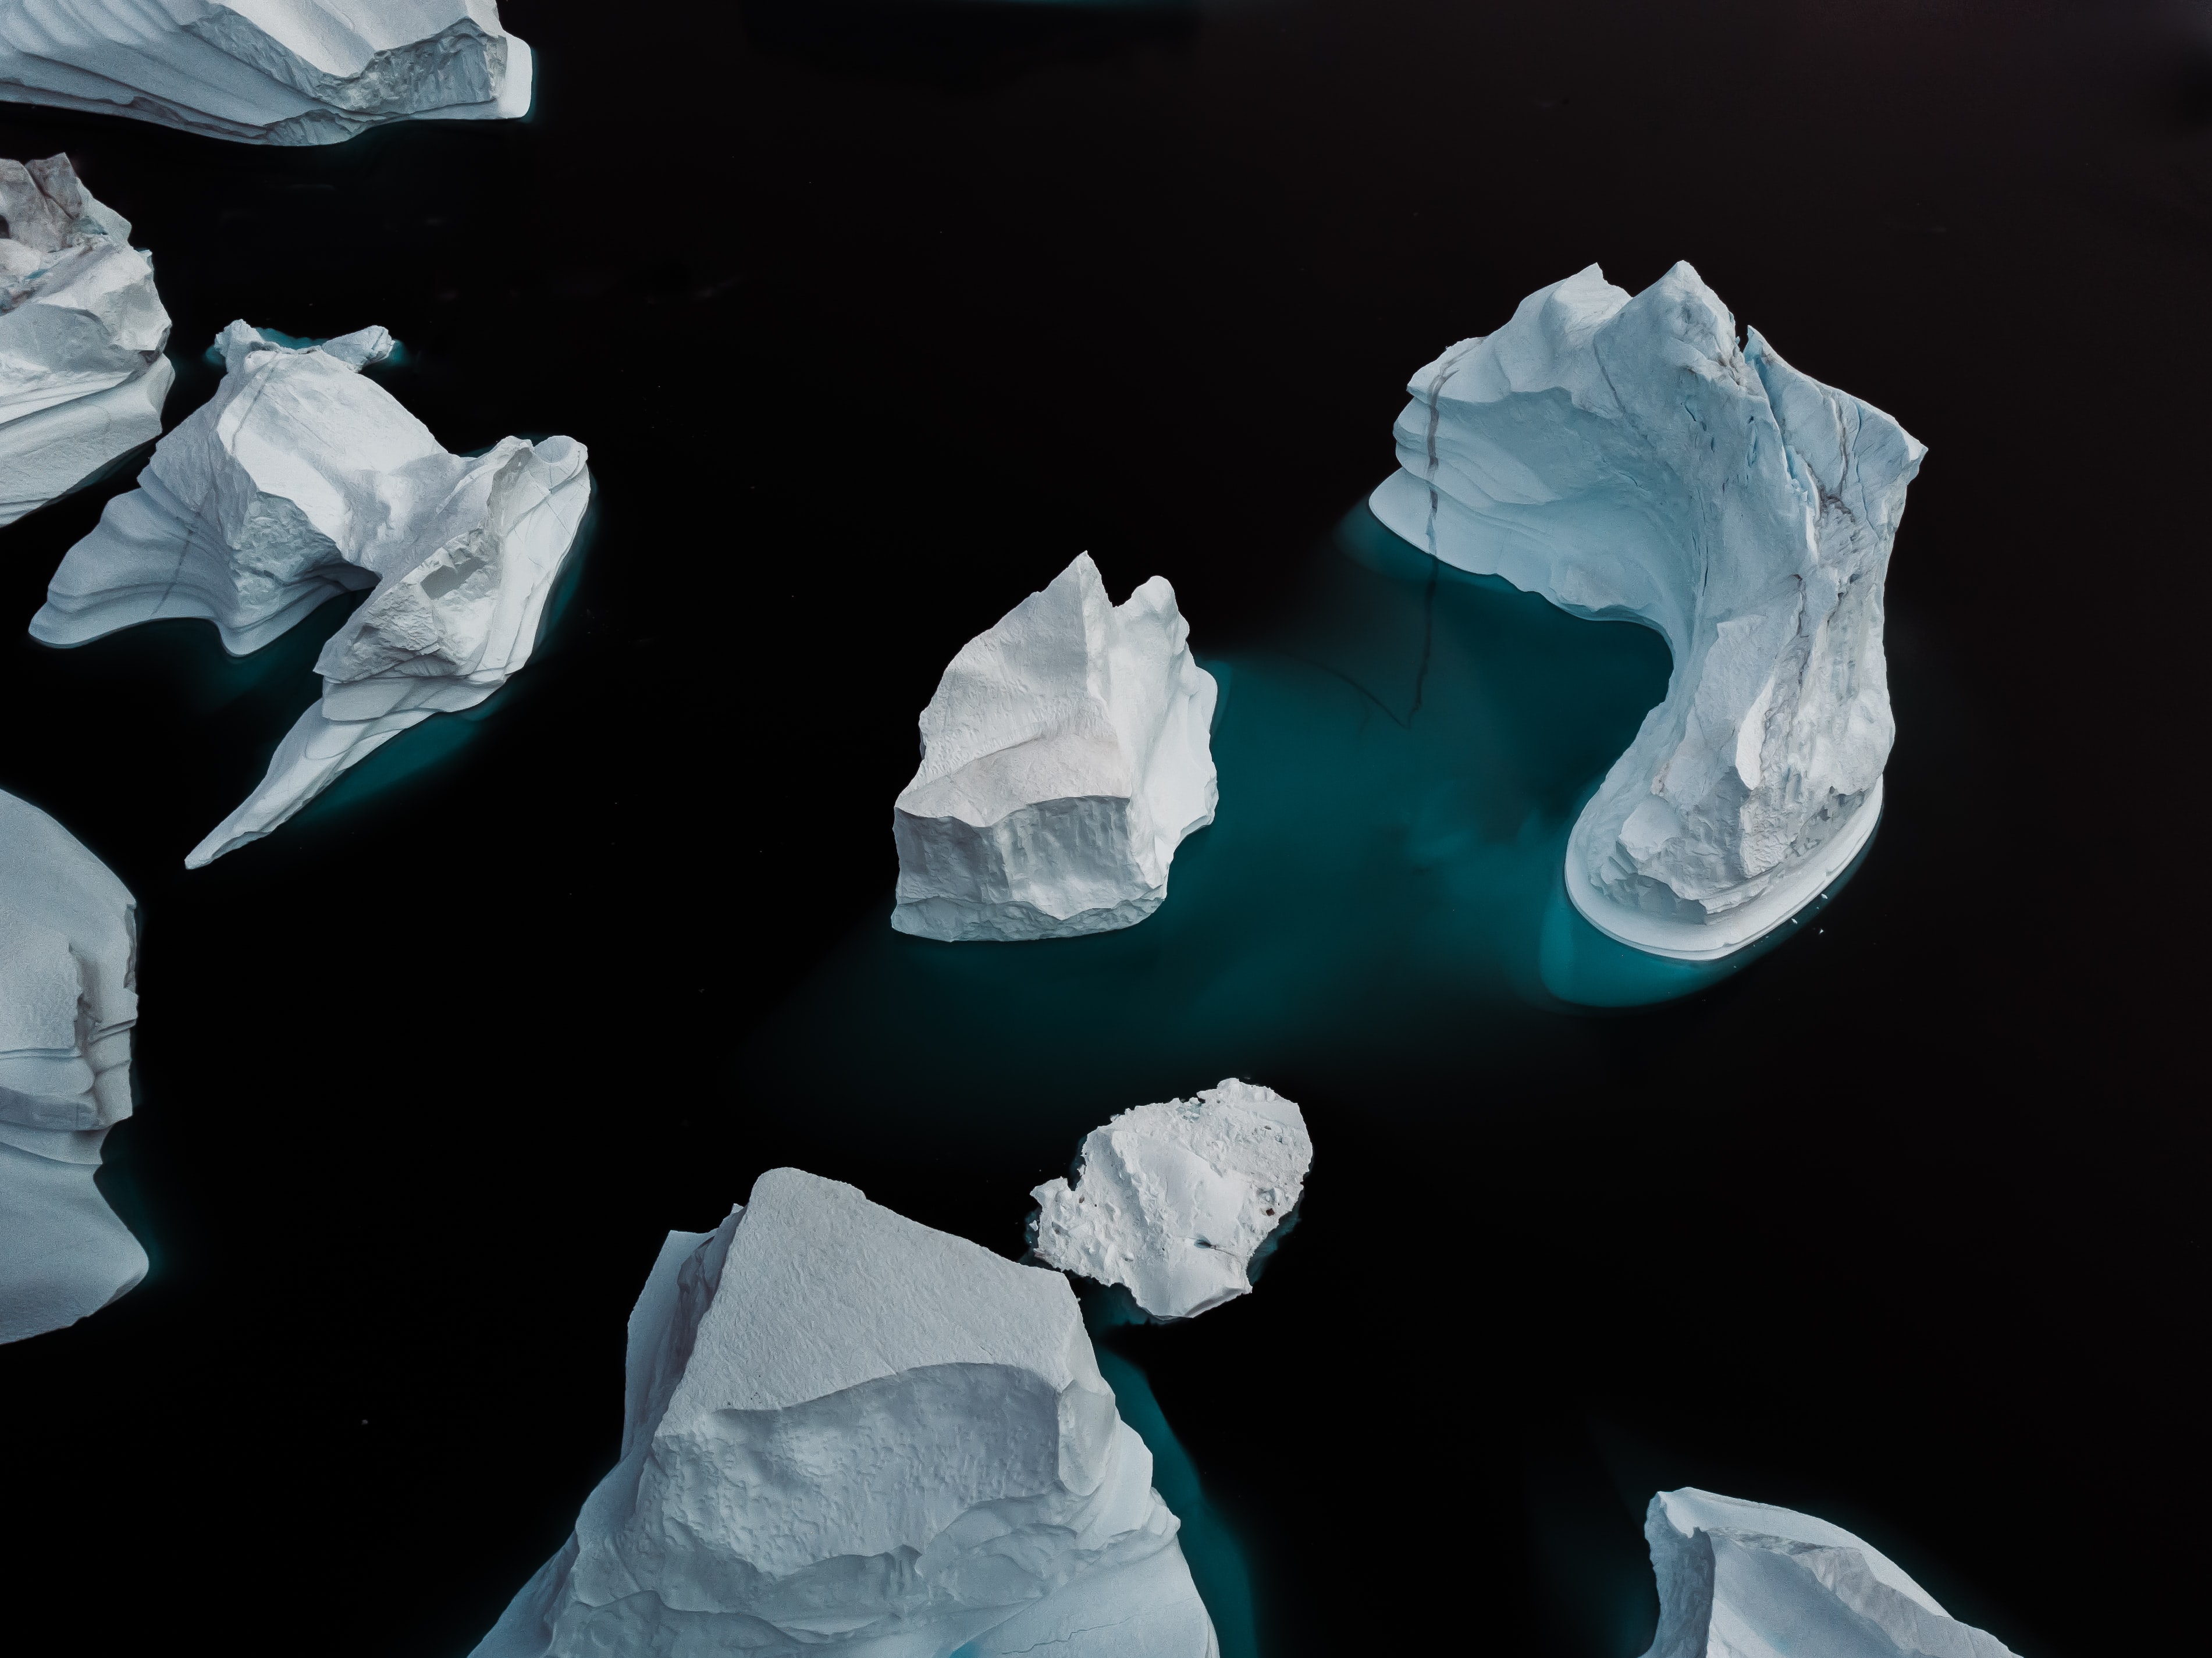 Desktop Backgrounds Ice water, sea, ice floes, nature